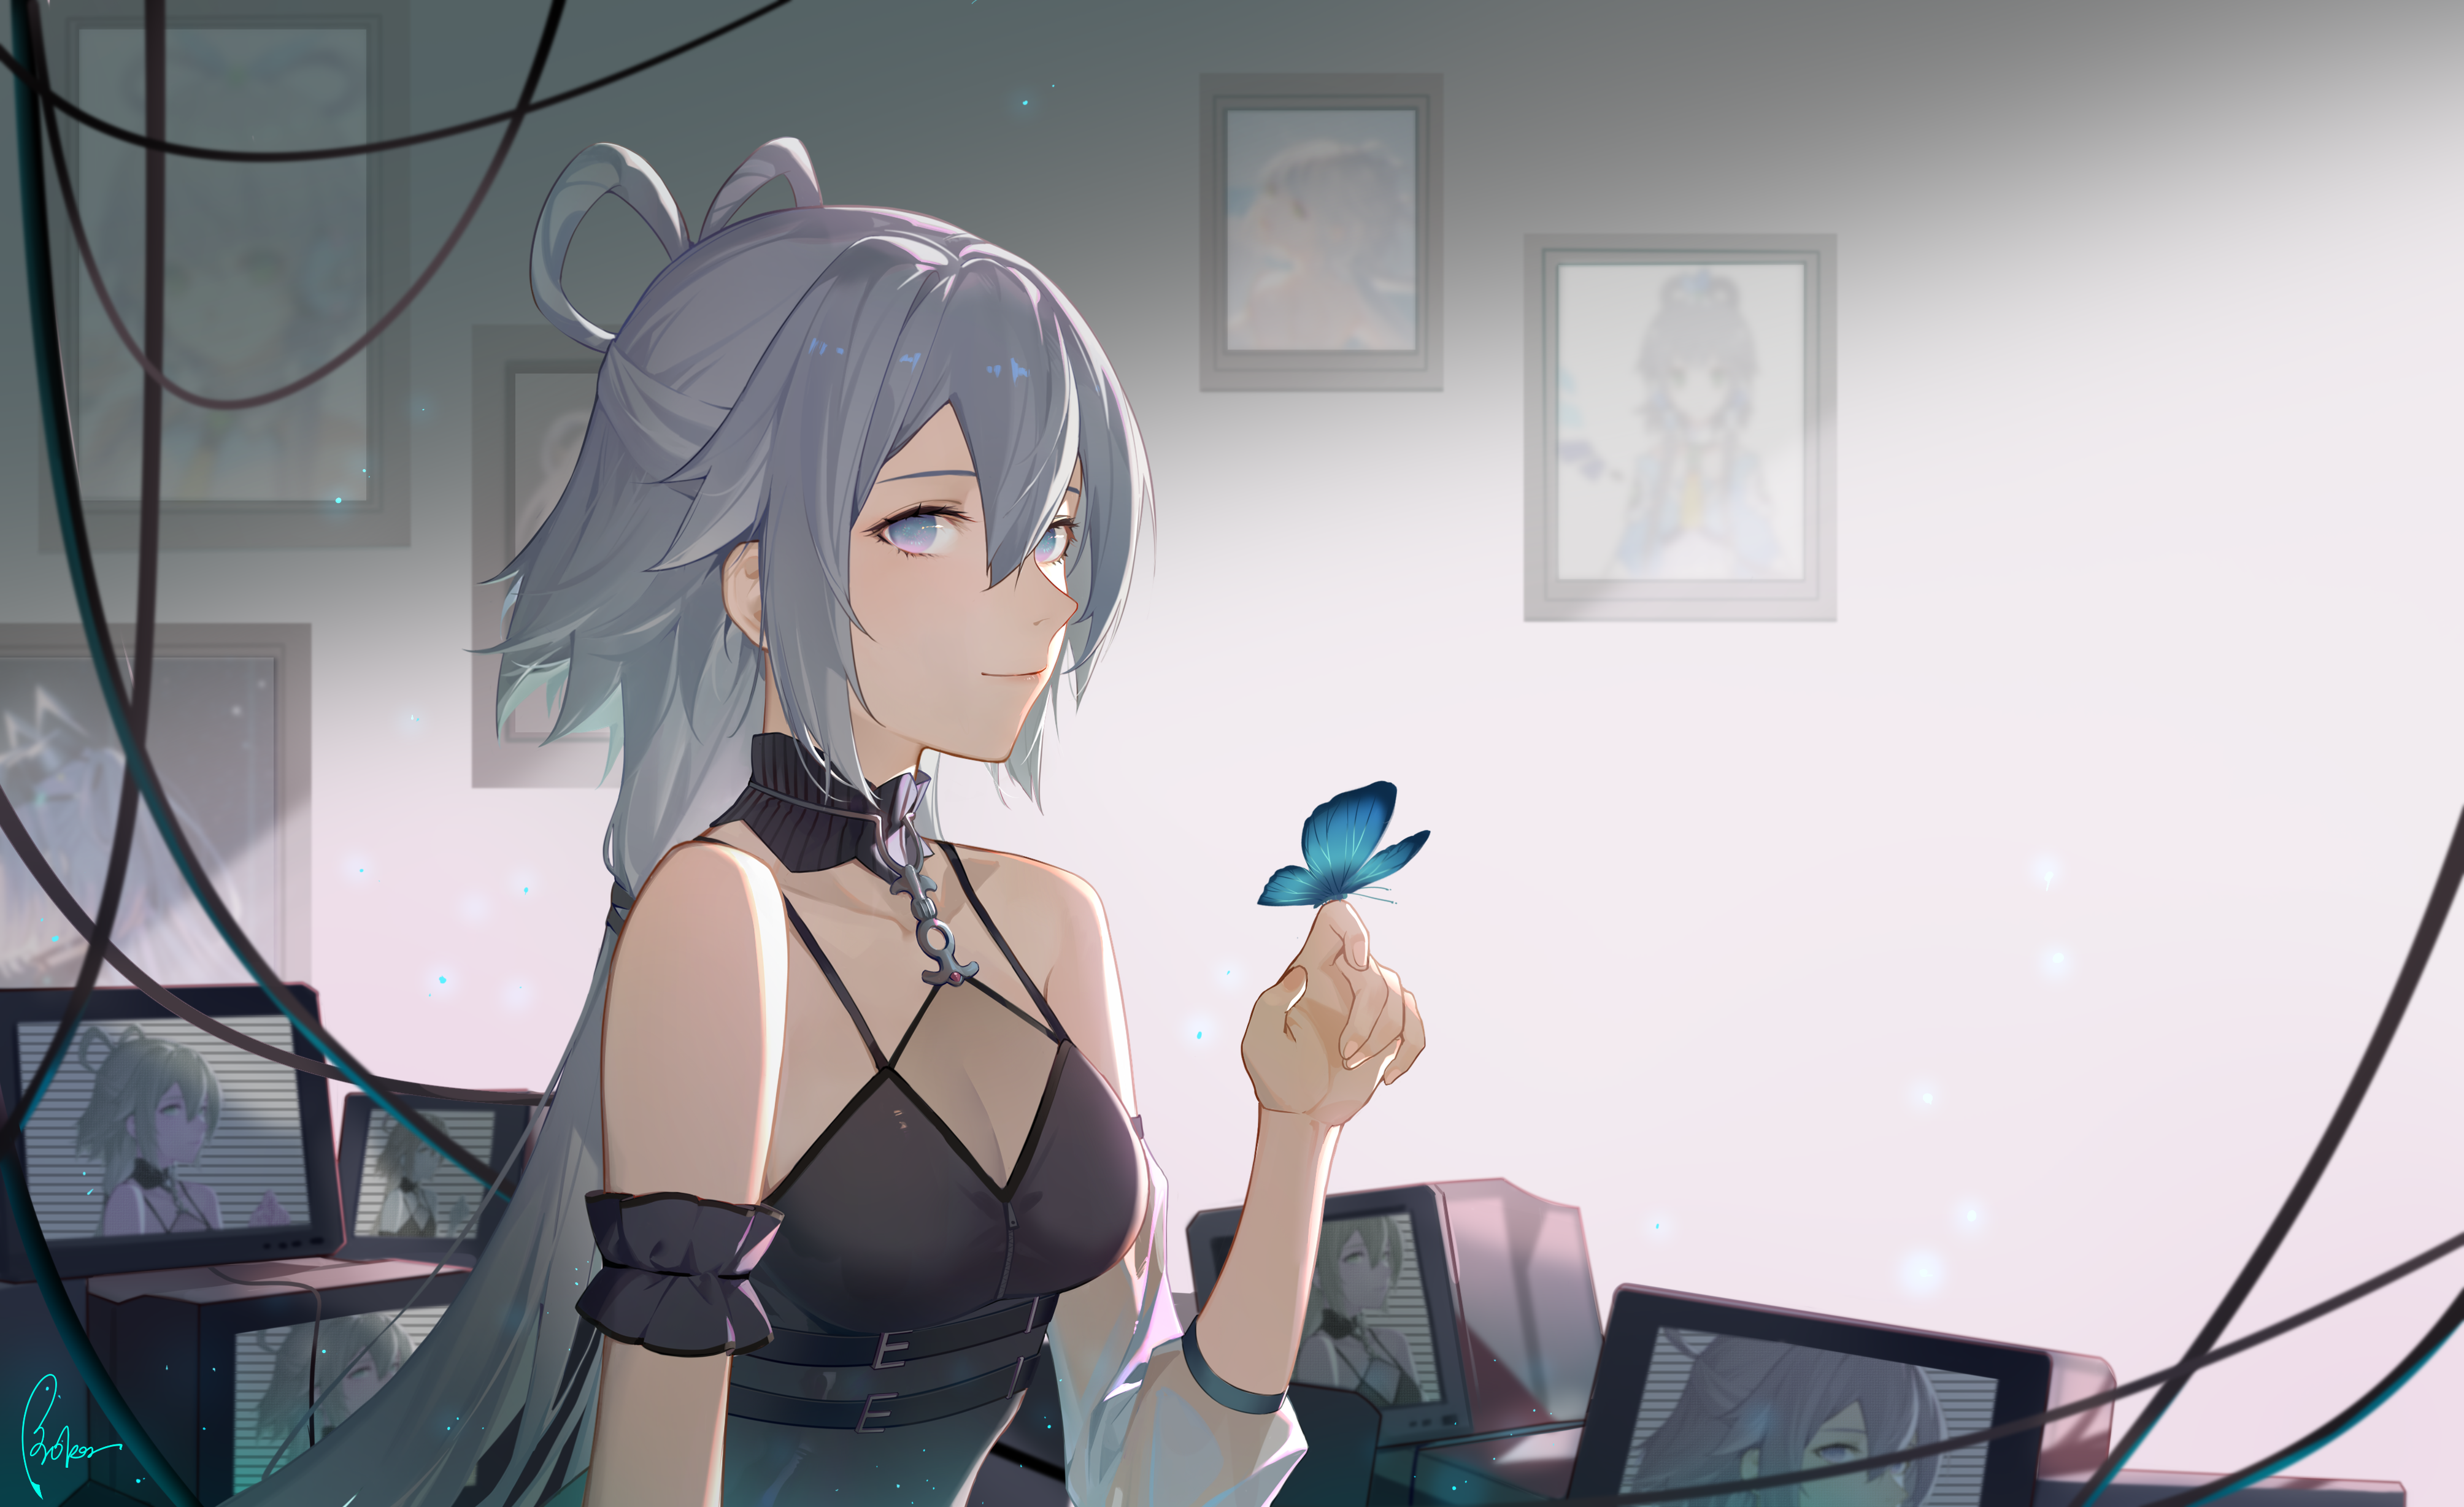 Anime 4016x2457 anime anime girls Vocaloid wires long hair TV photo frame wall smiling Luo Tianyi (vocaloid) gray hair gray eyes butterfly